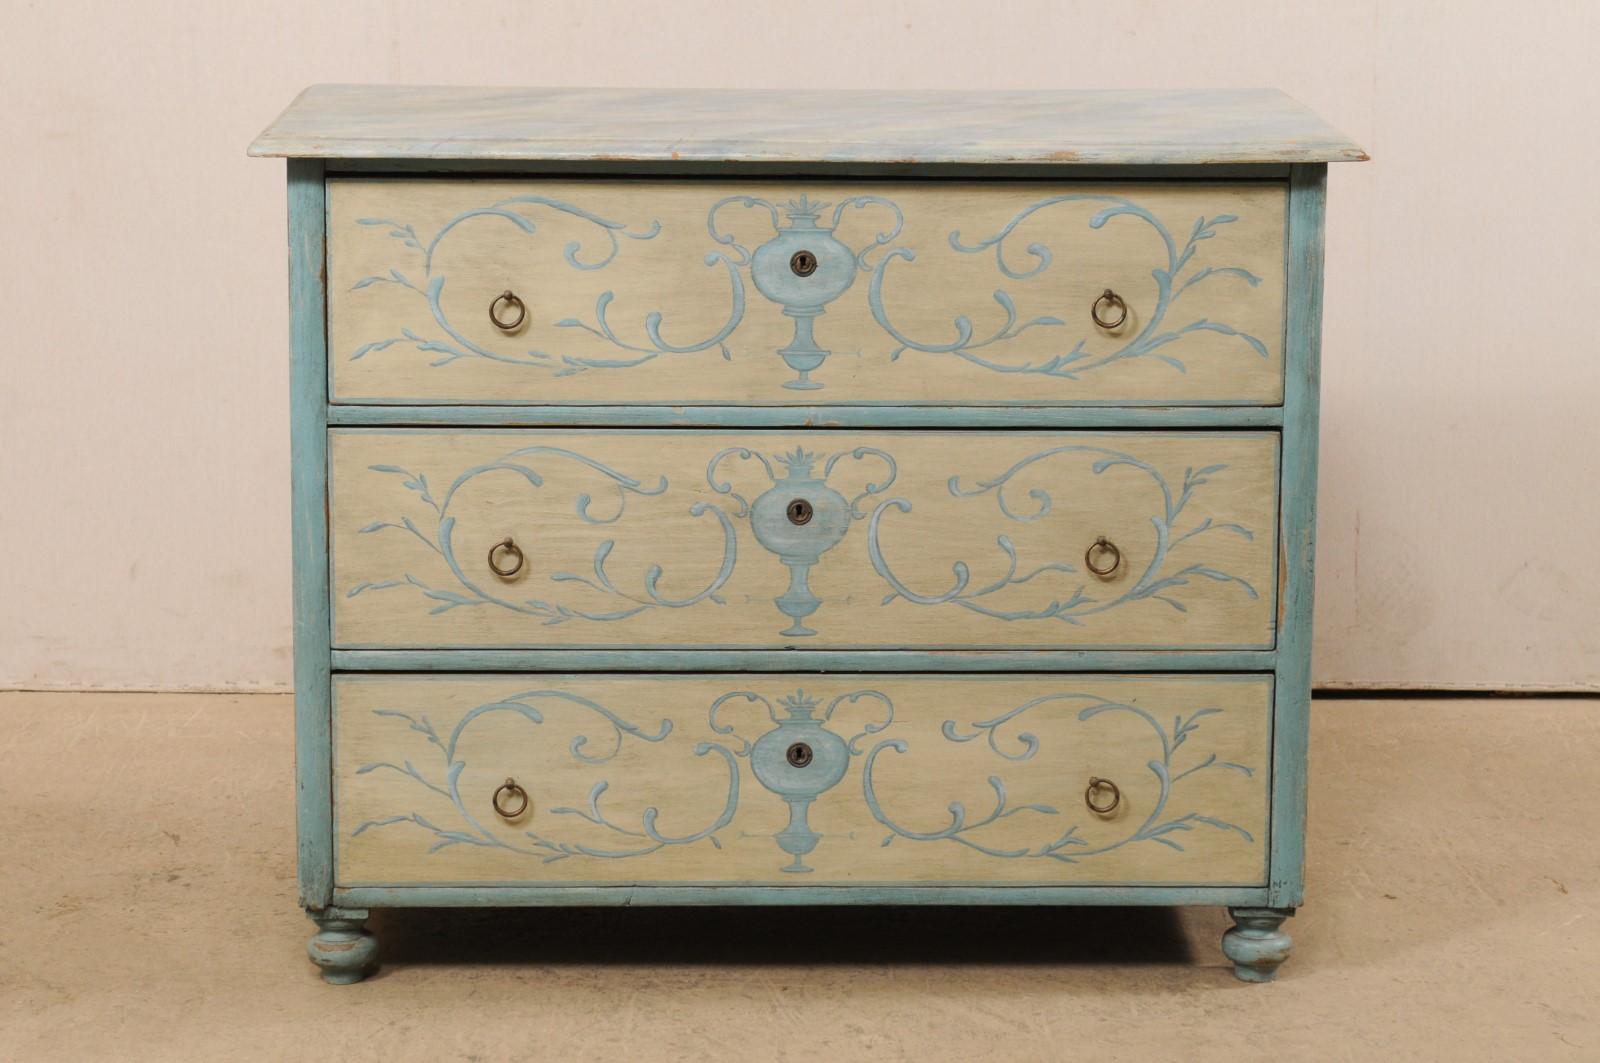 A European faux-marble and neoclassical-inspired motif hand painted wood chest from the turn of the century (late 19th to early 20th century). This antique chest from Europe features a rectangular-shaped top with beveled edges, atop a case housing